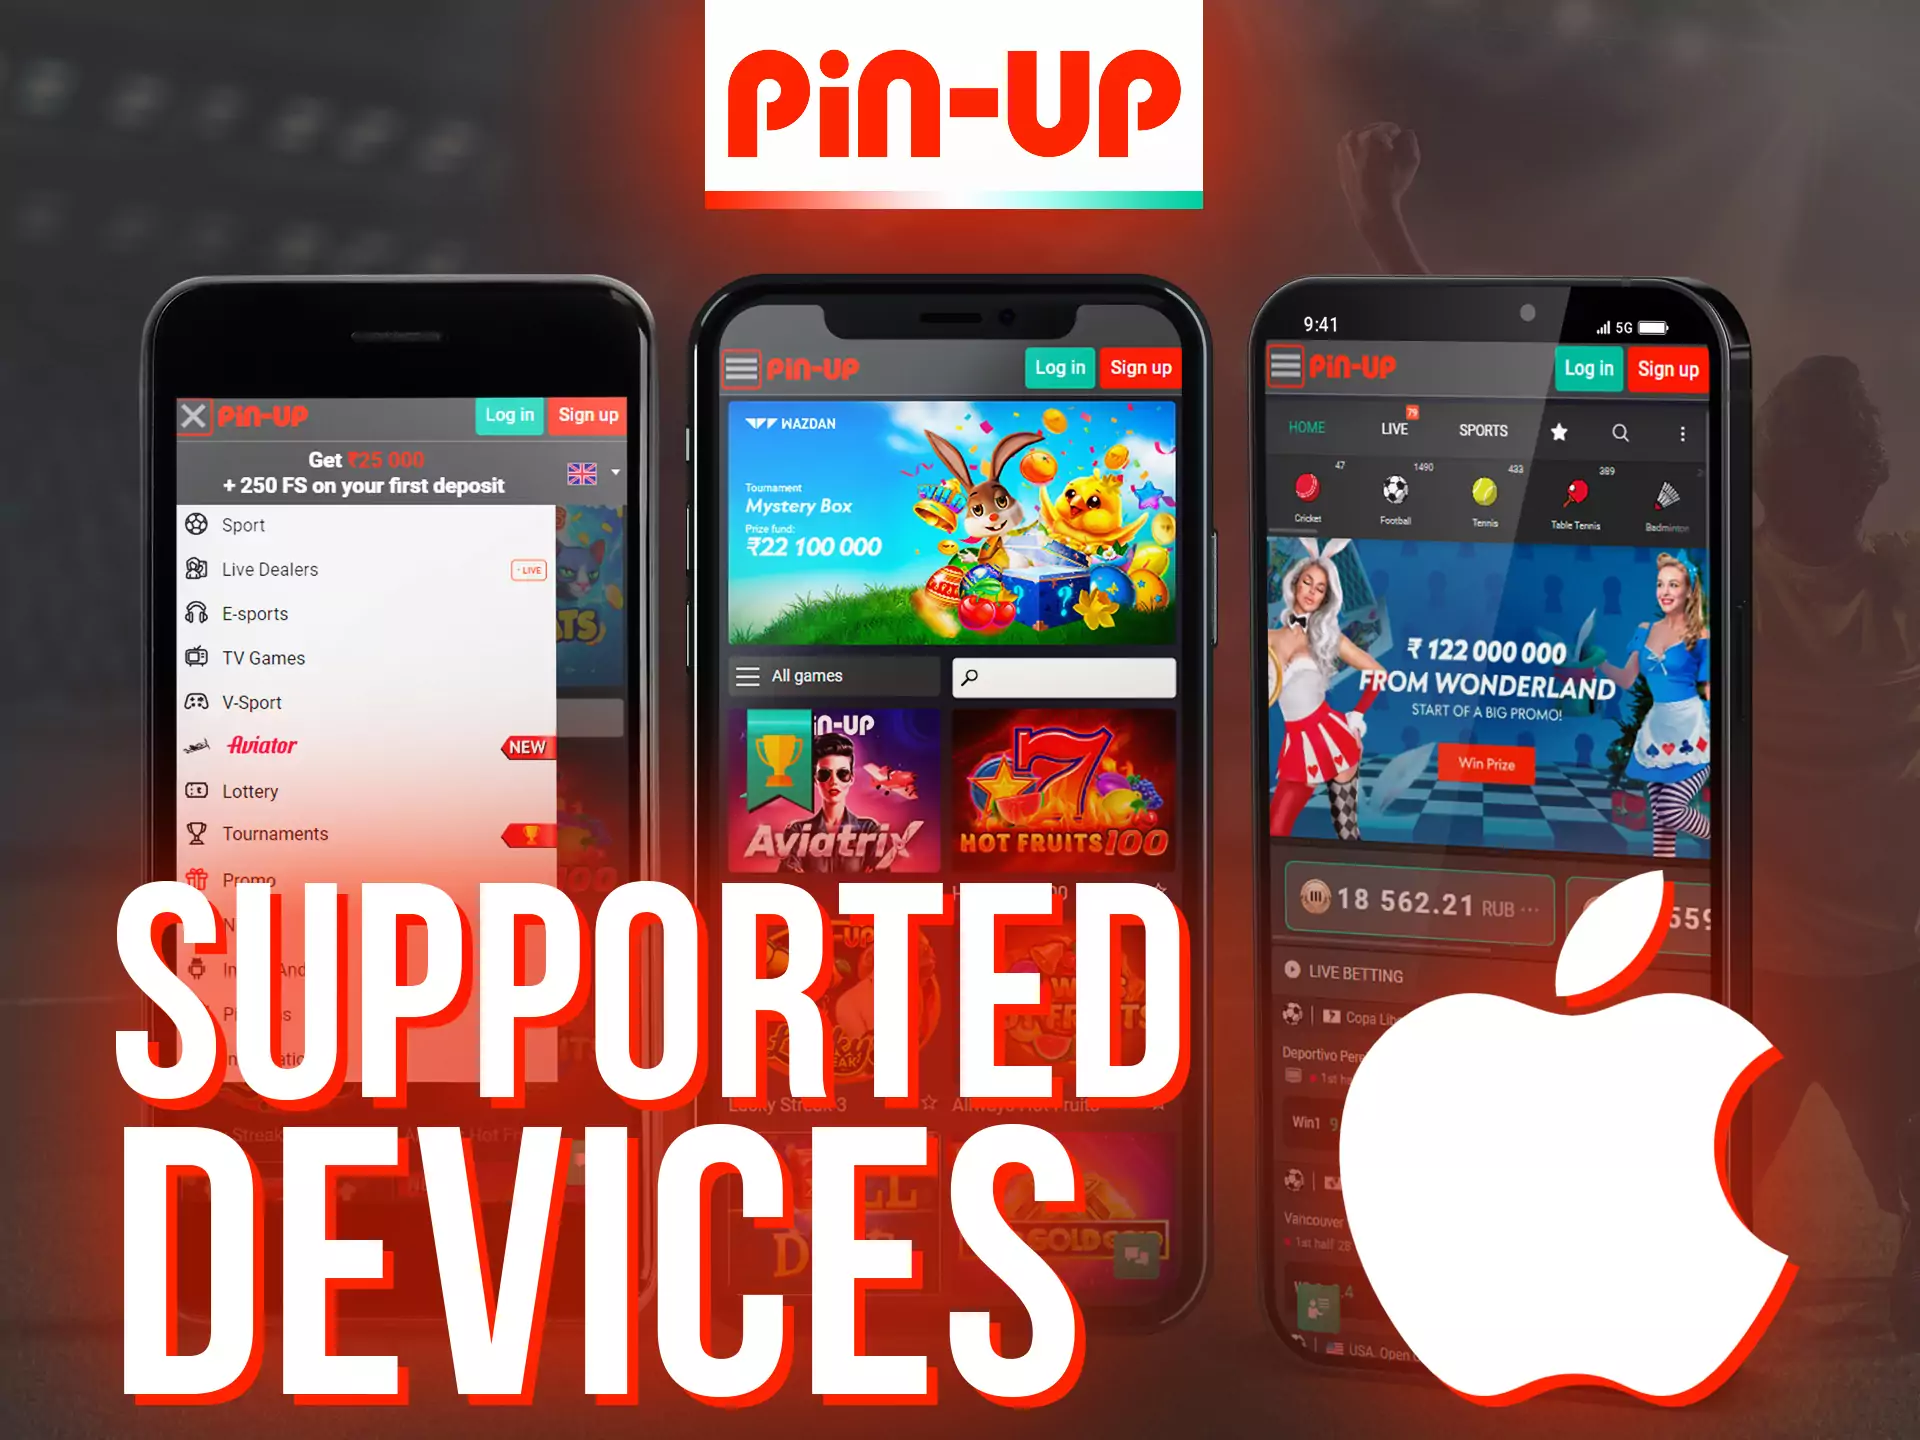 The Pin-Up app is supported on various iOS devices.